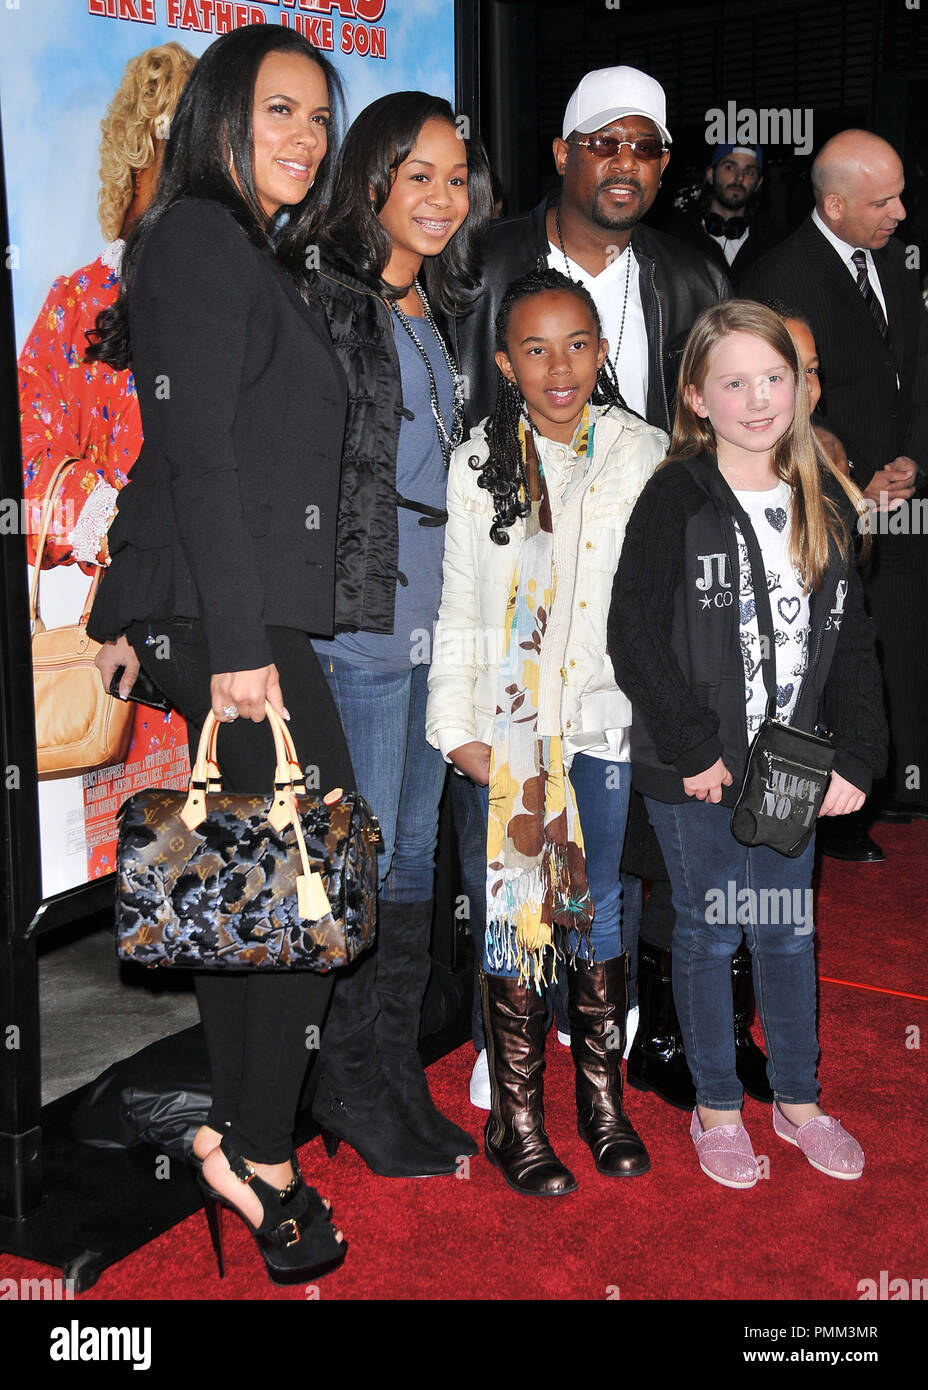 Martin Lawrence & his family at the Los Angeles Premiere of 'Big Mommas Like Father, Like Son' held at the Arclight Cinerama Dome in Hollywood, CA. The event took place on Thursday, February 10, 2011. Photo by PRPP Pacific Rim Photo Press / PictureLux Stock Photo